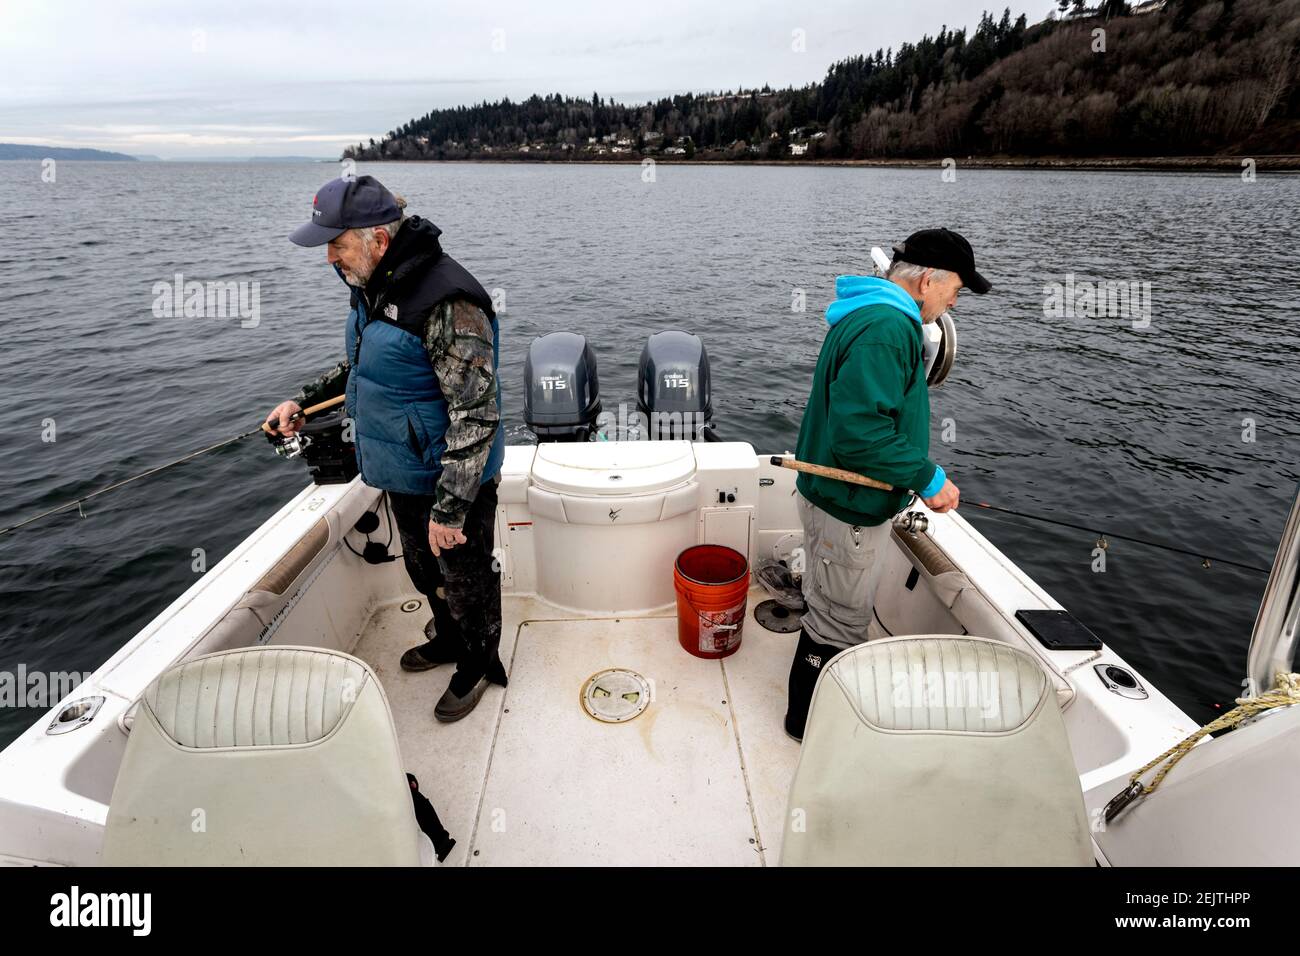 WA20083-00......WASHINGTON - Jim Johanson and Phil Russell jigging for squid on the Puget sound. Stock Photo